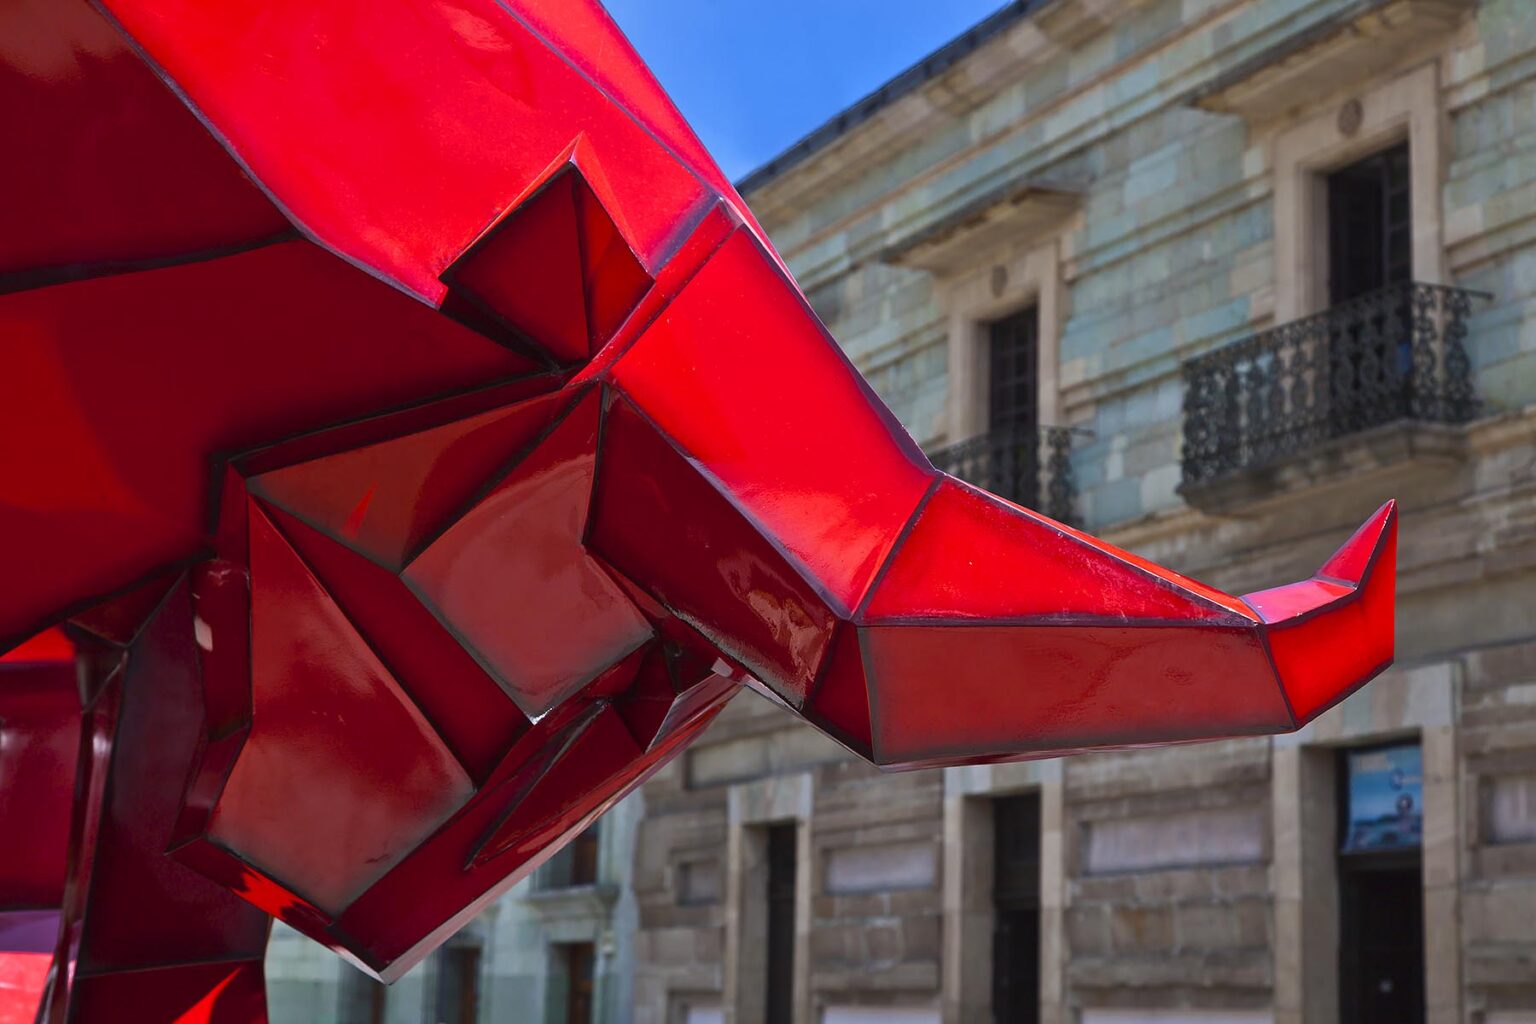 A RED BULL SCULPTURE by FERNANDO ANDRIACCI on display in front of the Oaxacan Cathedral - OAXACA, MEXICO